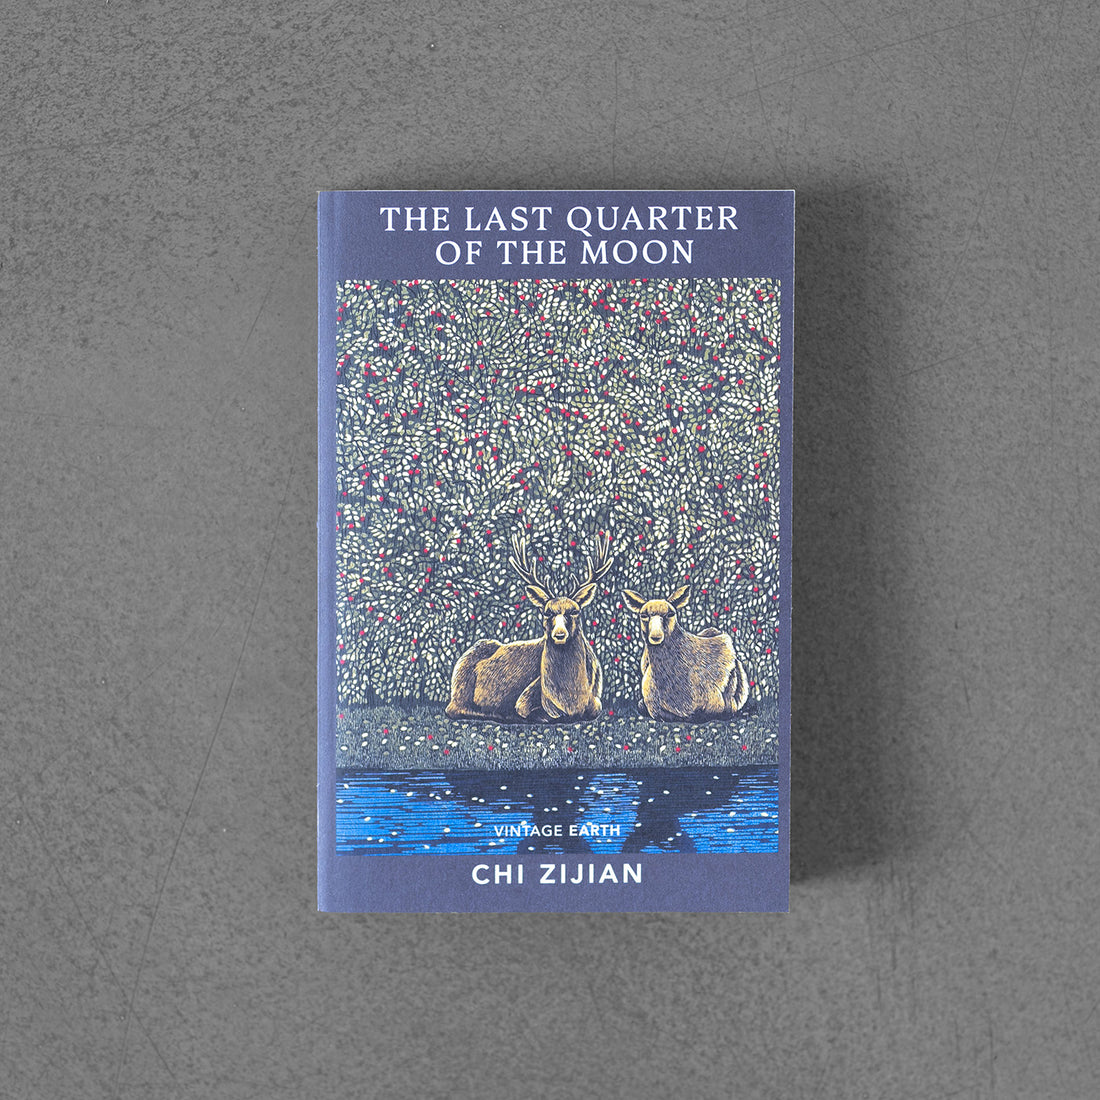 Last Quarter of the Moon - Chi Ziijan (Vintage Earth collection)